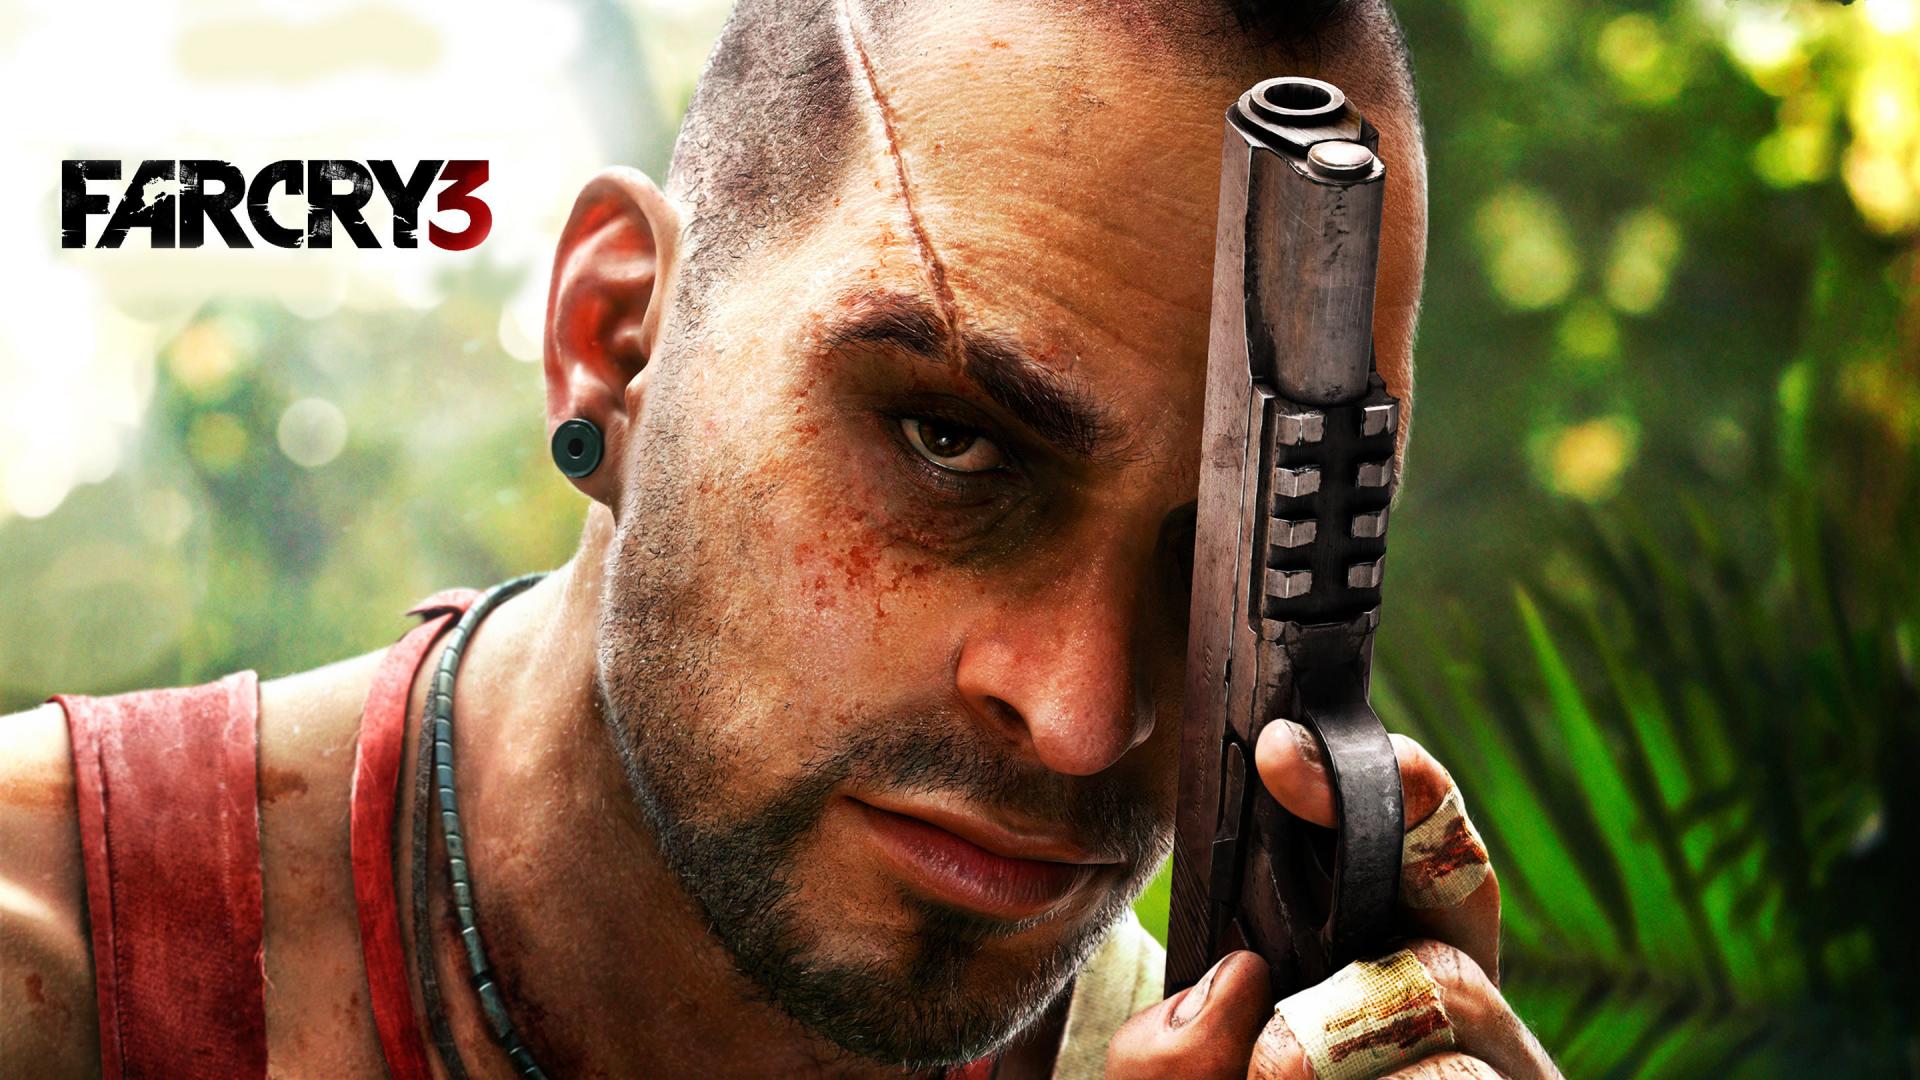 far cry 3 download pc